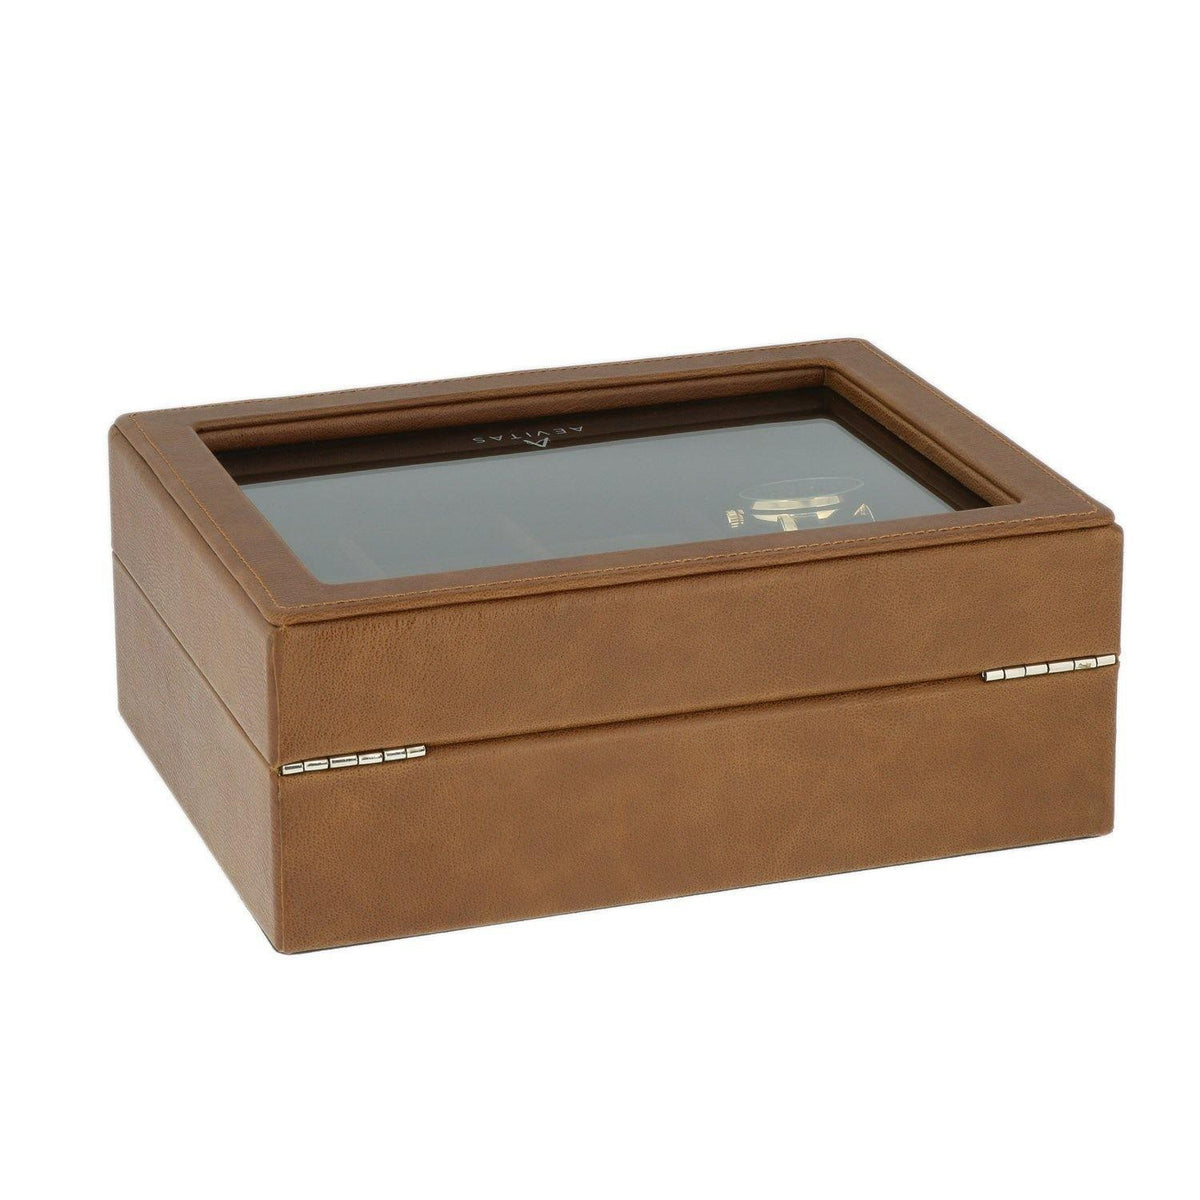 Cognac Brown Genuine Leather Watch Collectors Box for 8 Wrist Watches Velvet Lining by Aevitas